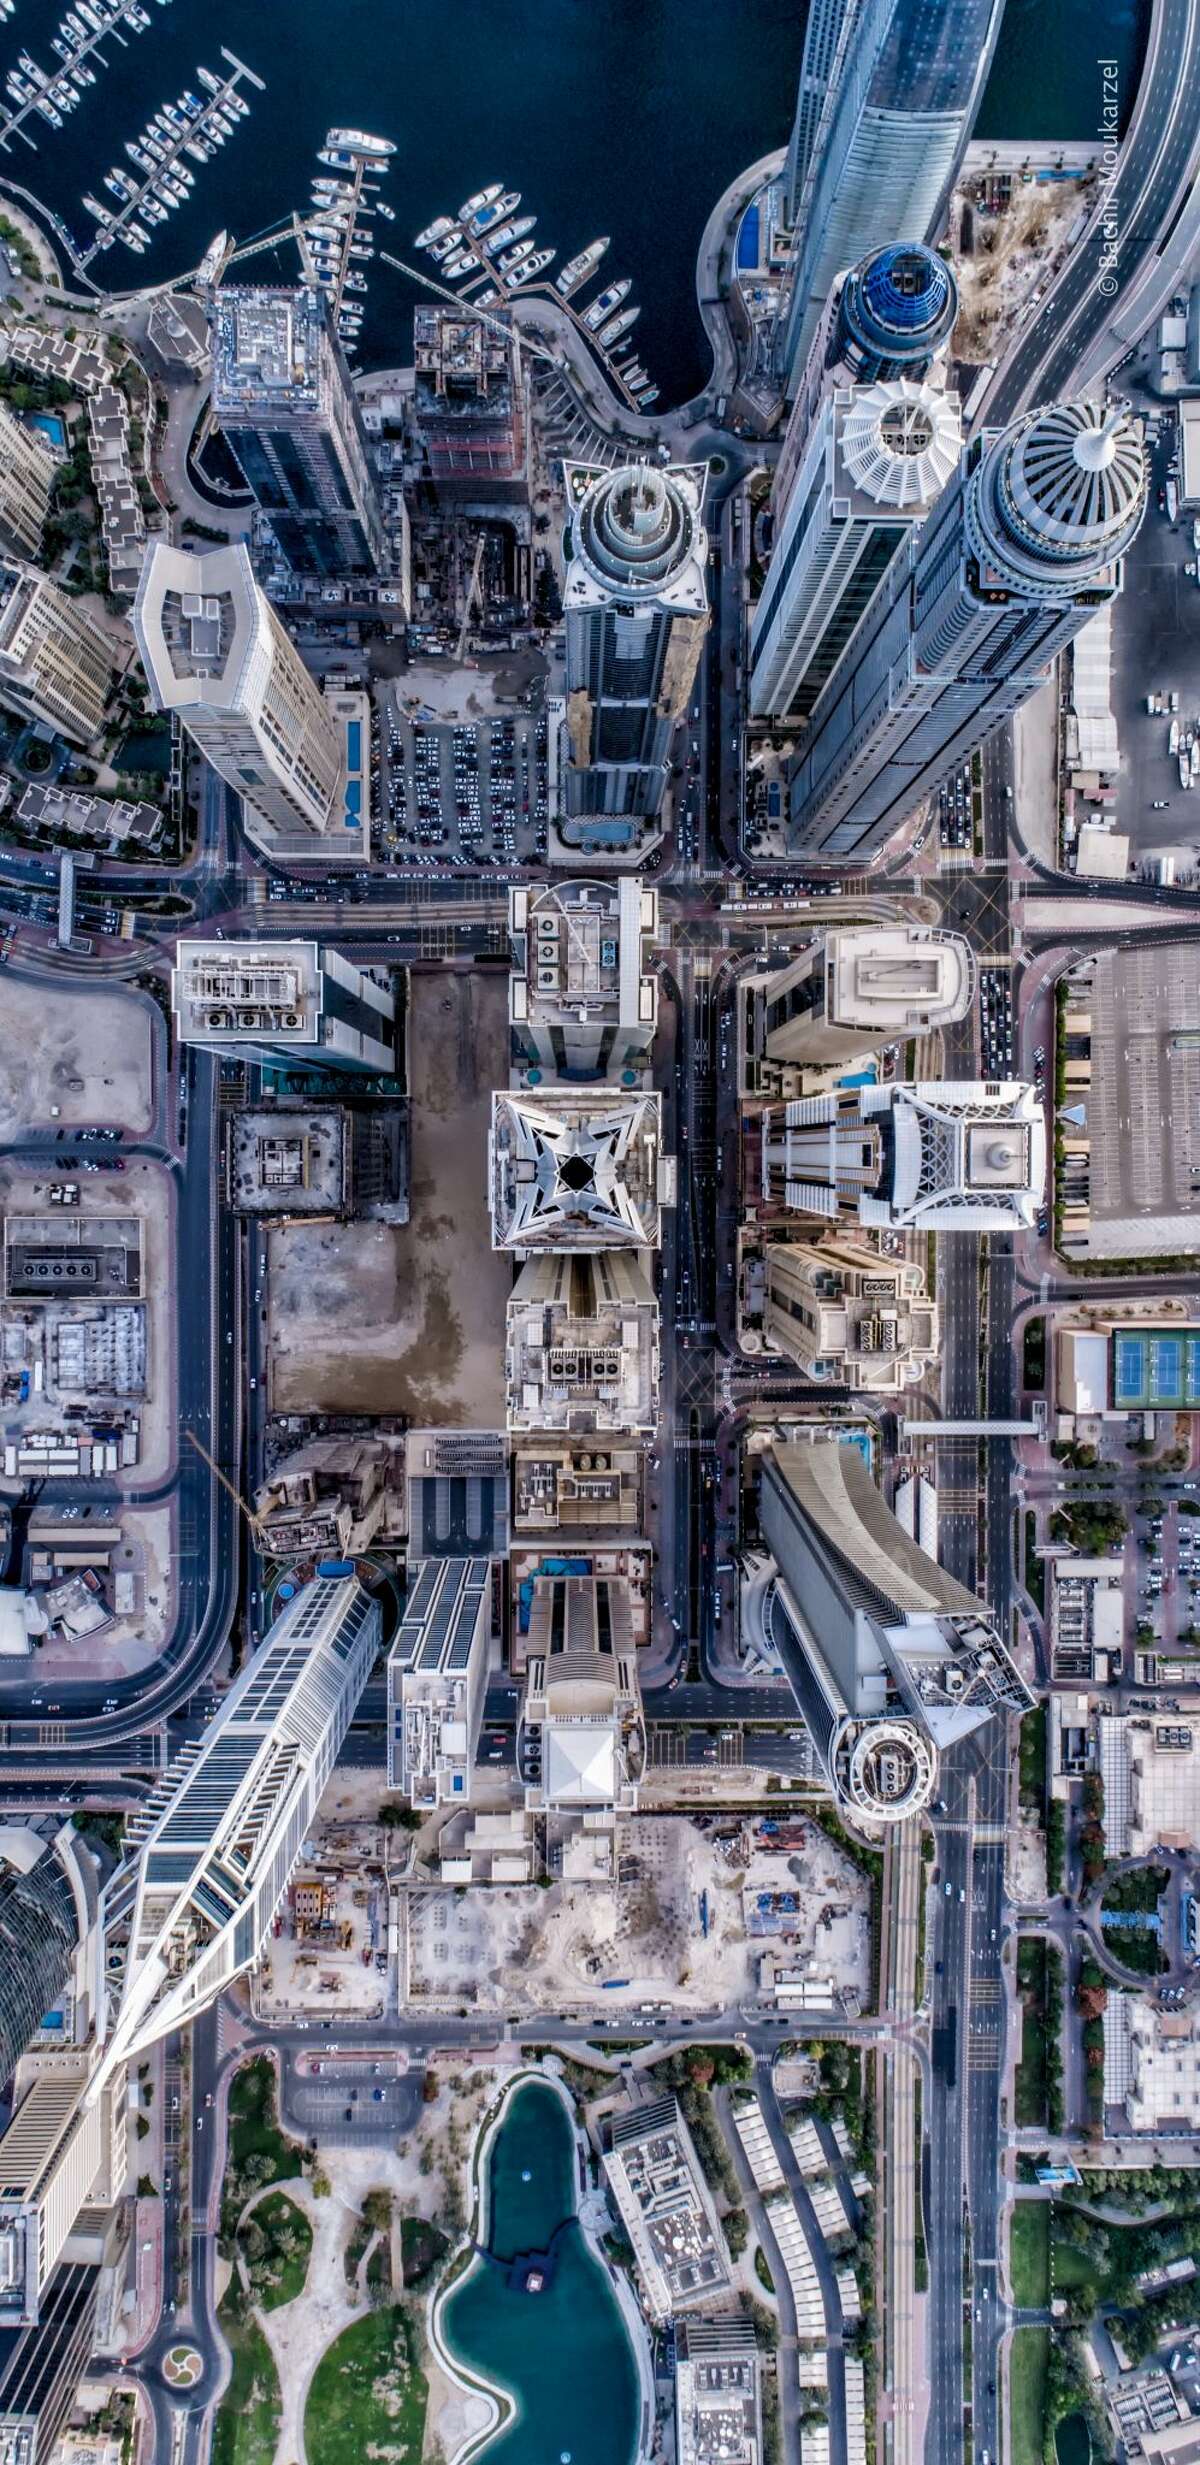 Drone photographer Bachir Moukarzel captures incredible new perspectives of Dubai by looking at the city's infrastructure and buildings at a 90-degree angle from above the sites. He shares his photos with tens of thousands of followers on Instagram.